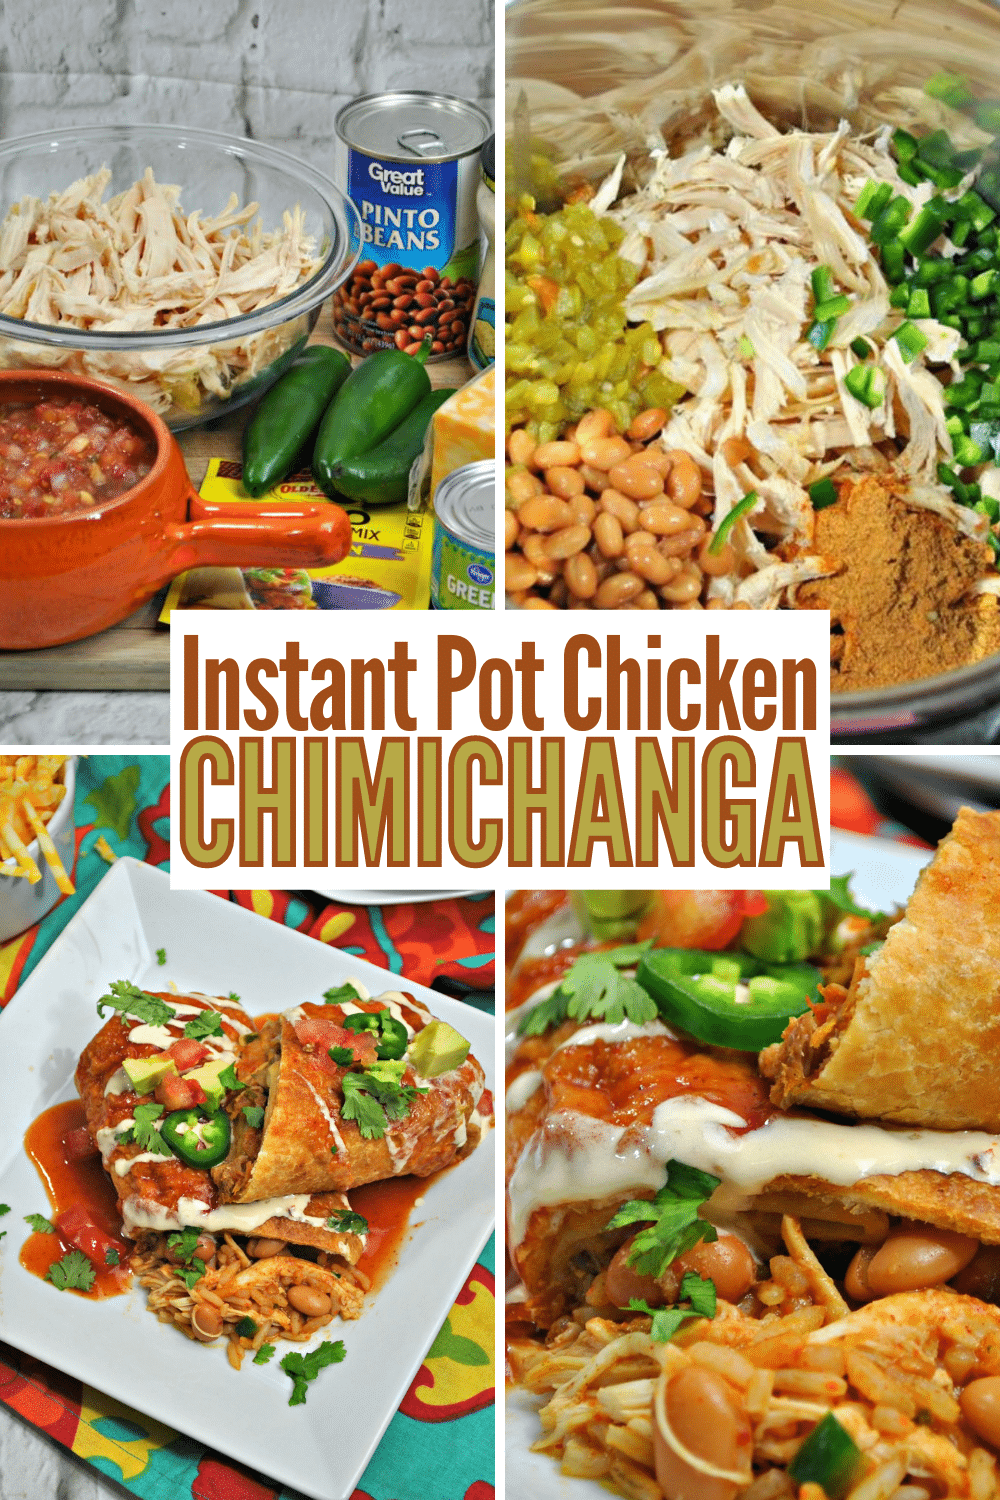 This Easy Instant Pot Chicken Chimichanga Recipe makes dinnertime a total breeze! Packed full of flavor and ready with minimal effort! #instantpot #pressurecooker #chickenchimichanga #chimichanga #recipe via @wondermomwannab